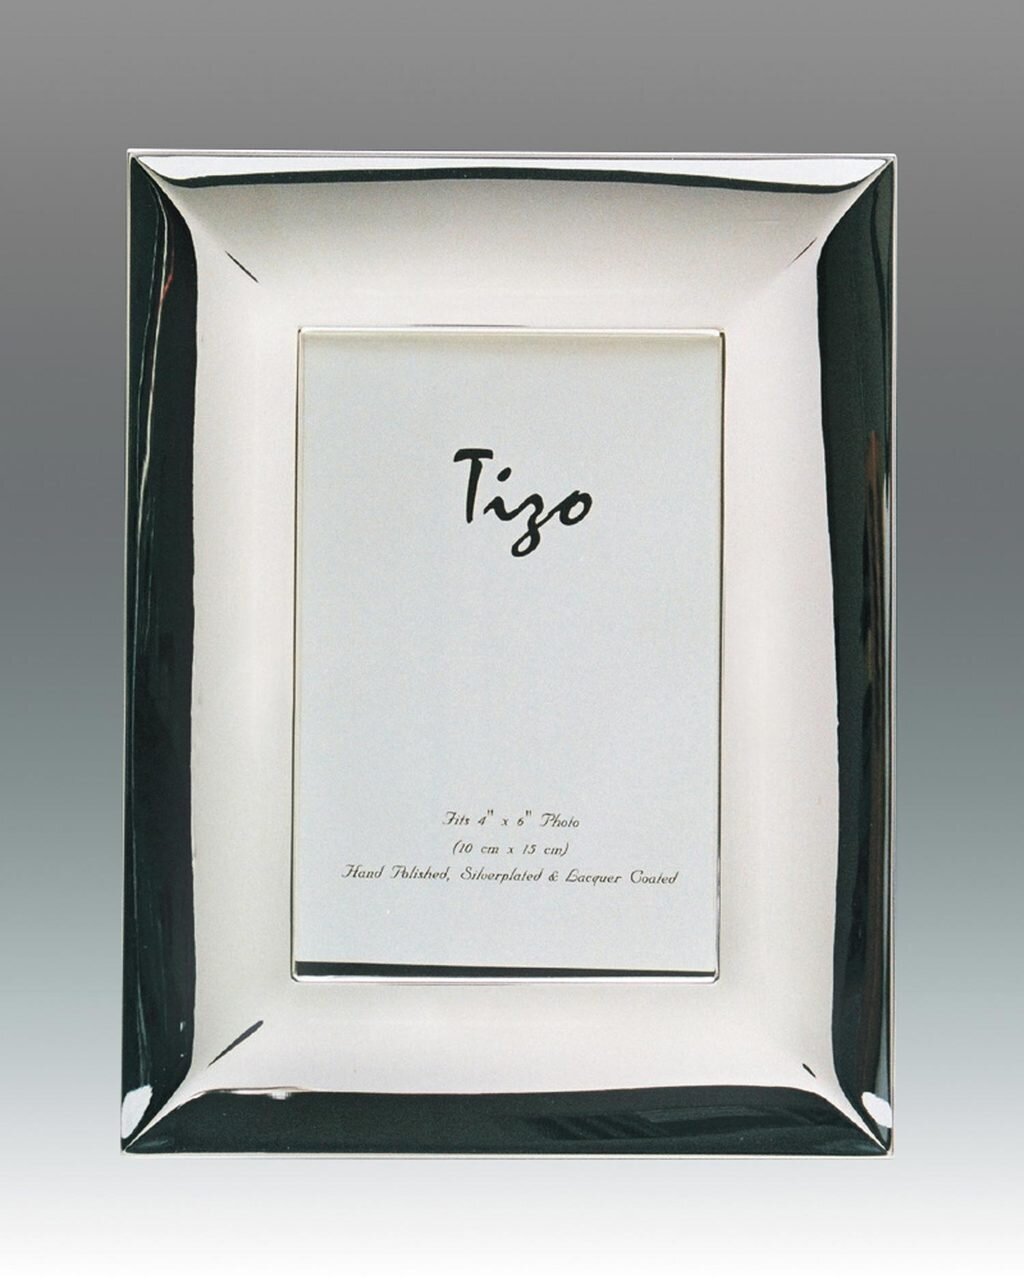 Tizo Classic Wide 8 x 10 Inch Silver Plated Picture Frame